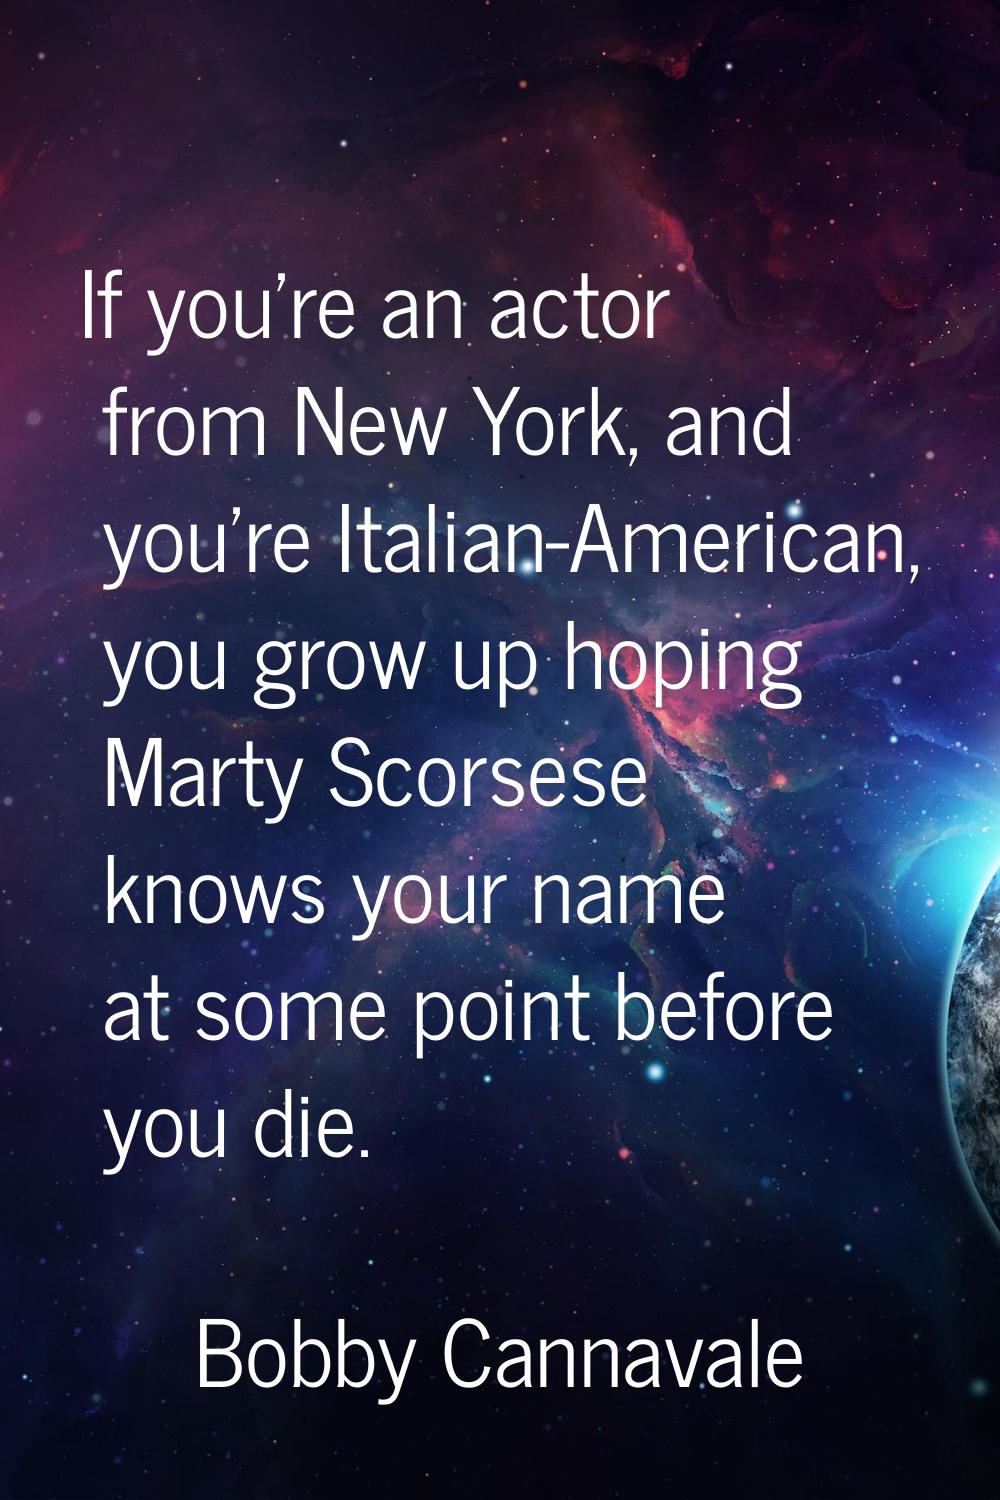 If you're an actor from New York, and you're Italian-American, you grow up hoping Marty Scorsese kn